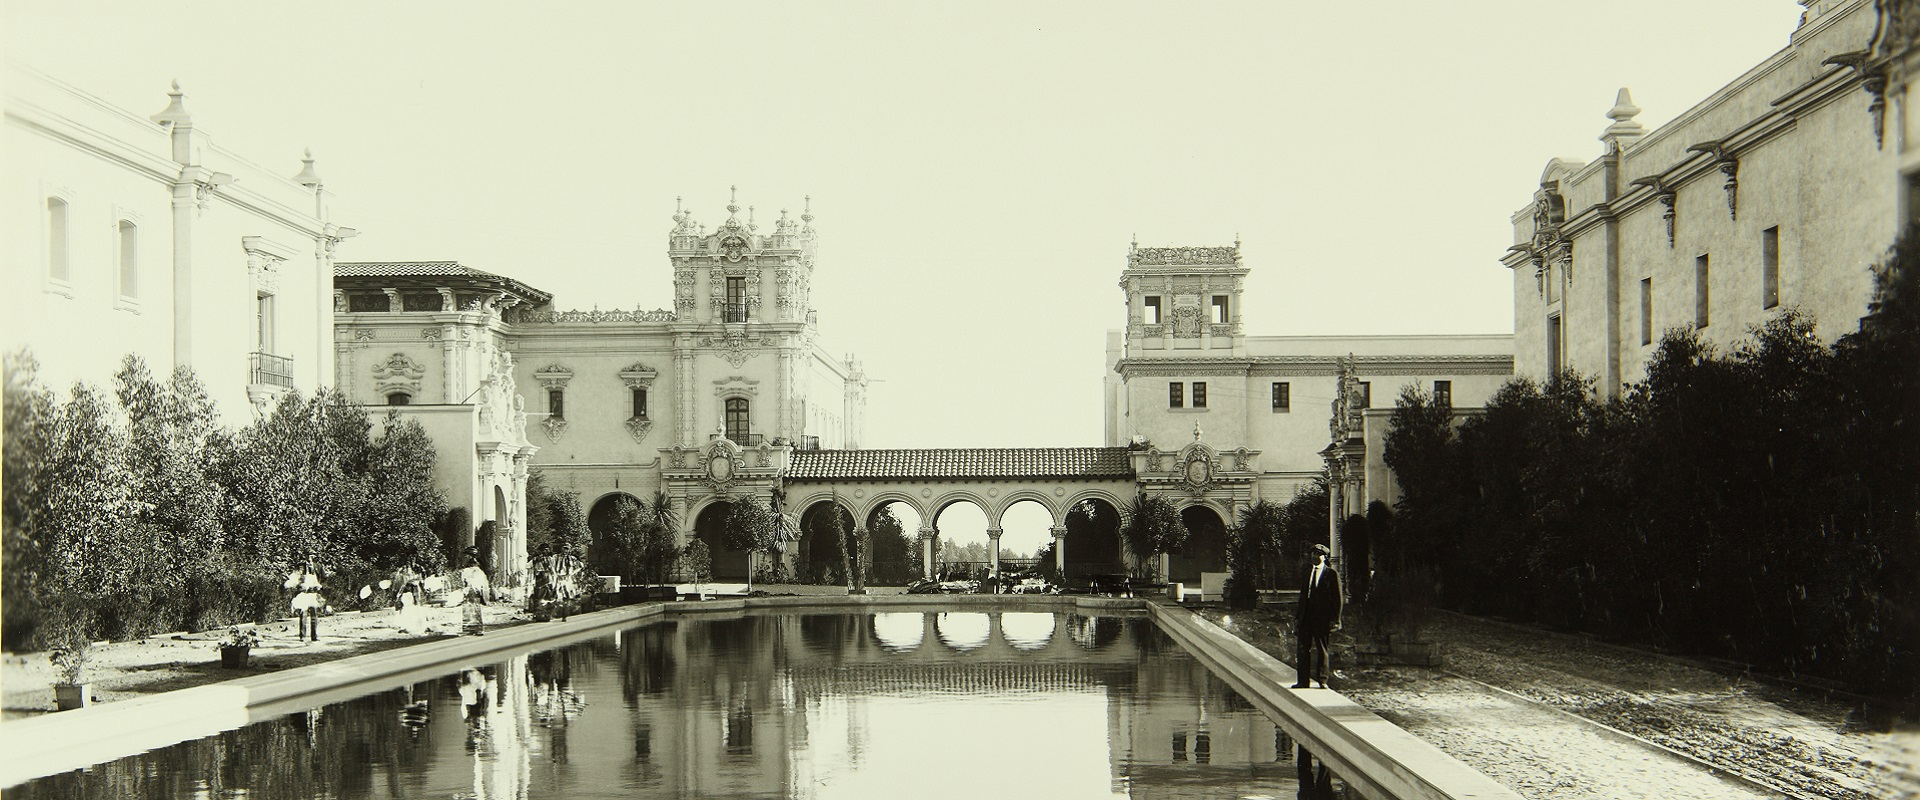 An old black and white photo with the view looking out over the lily pond away from the botanical building. An arched walkway with the house of hospitality and casa del balboa in the background.